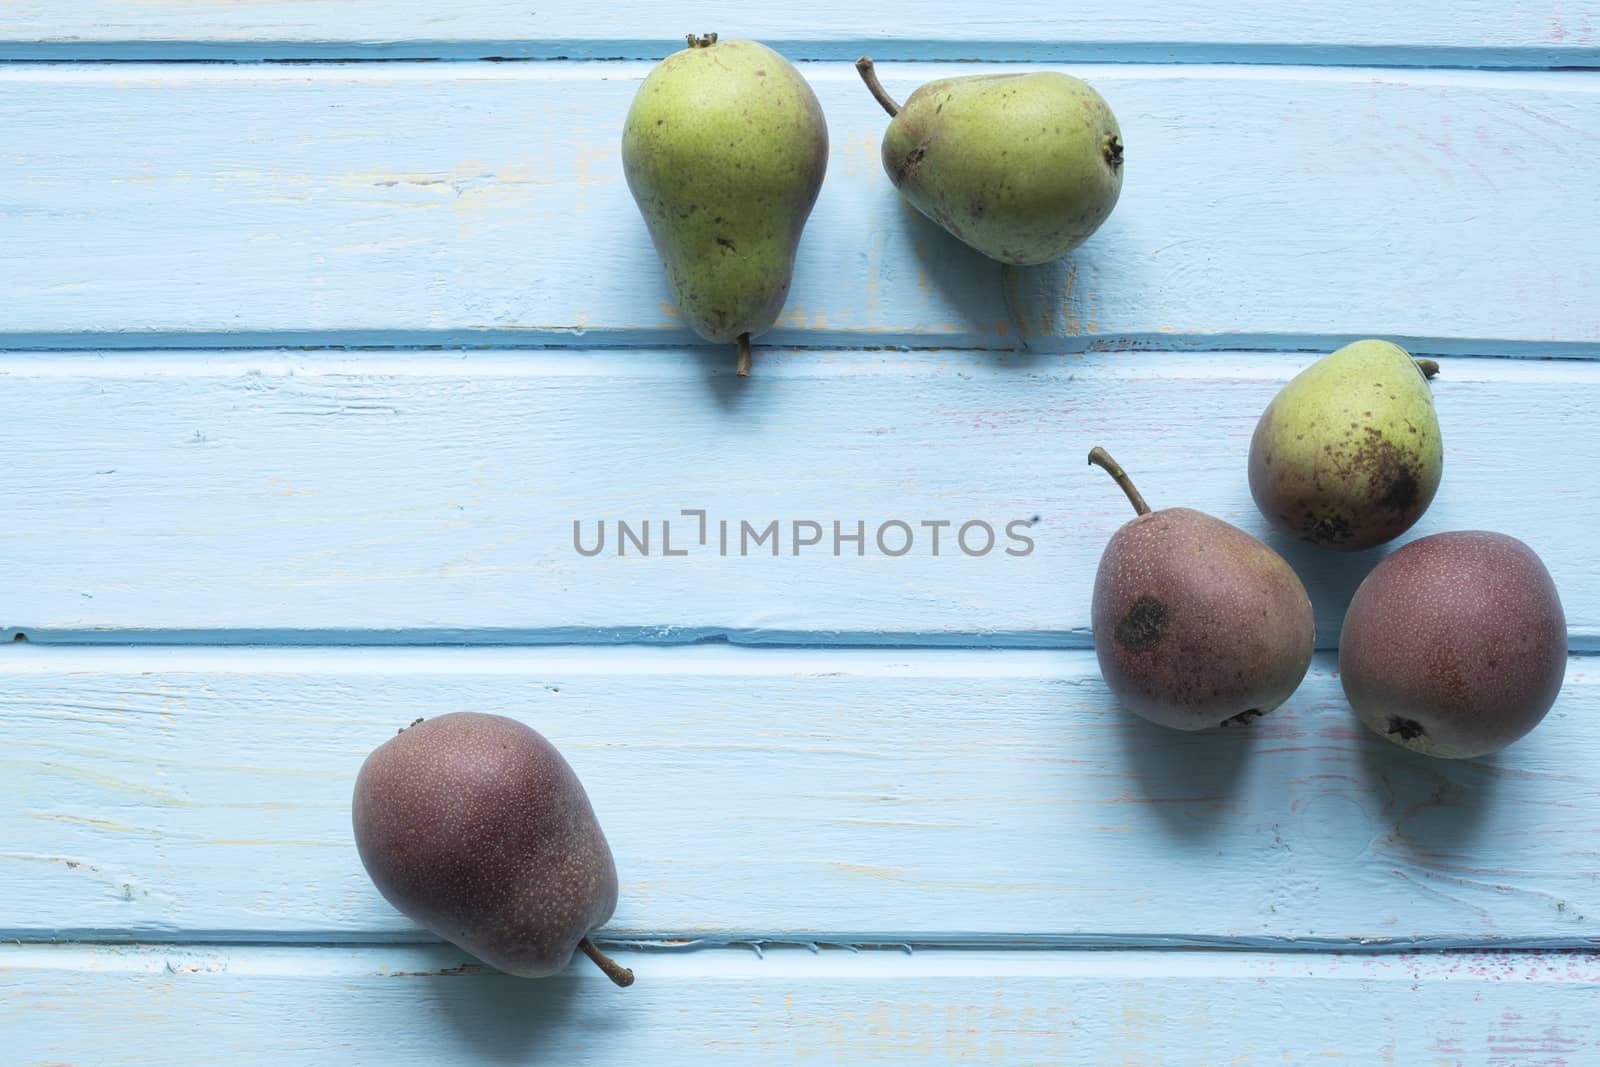 Halves of fresh ripe pears on wooden background.